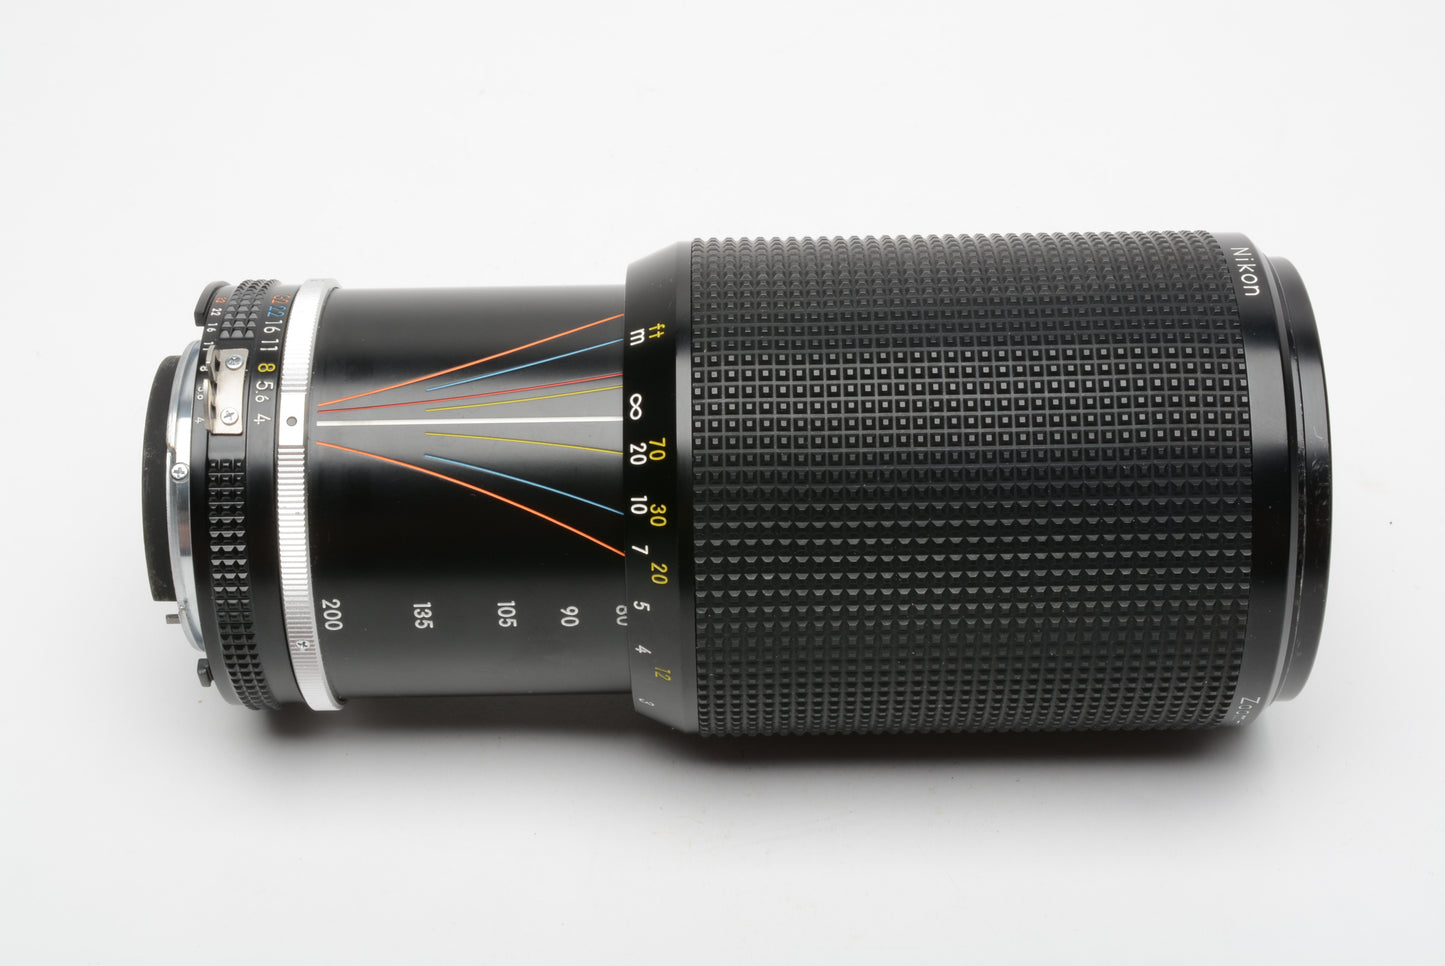 Nikon Nikkor 80-200mm f4 AIS telephoto zoom lens, very clean and sharp!